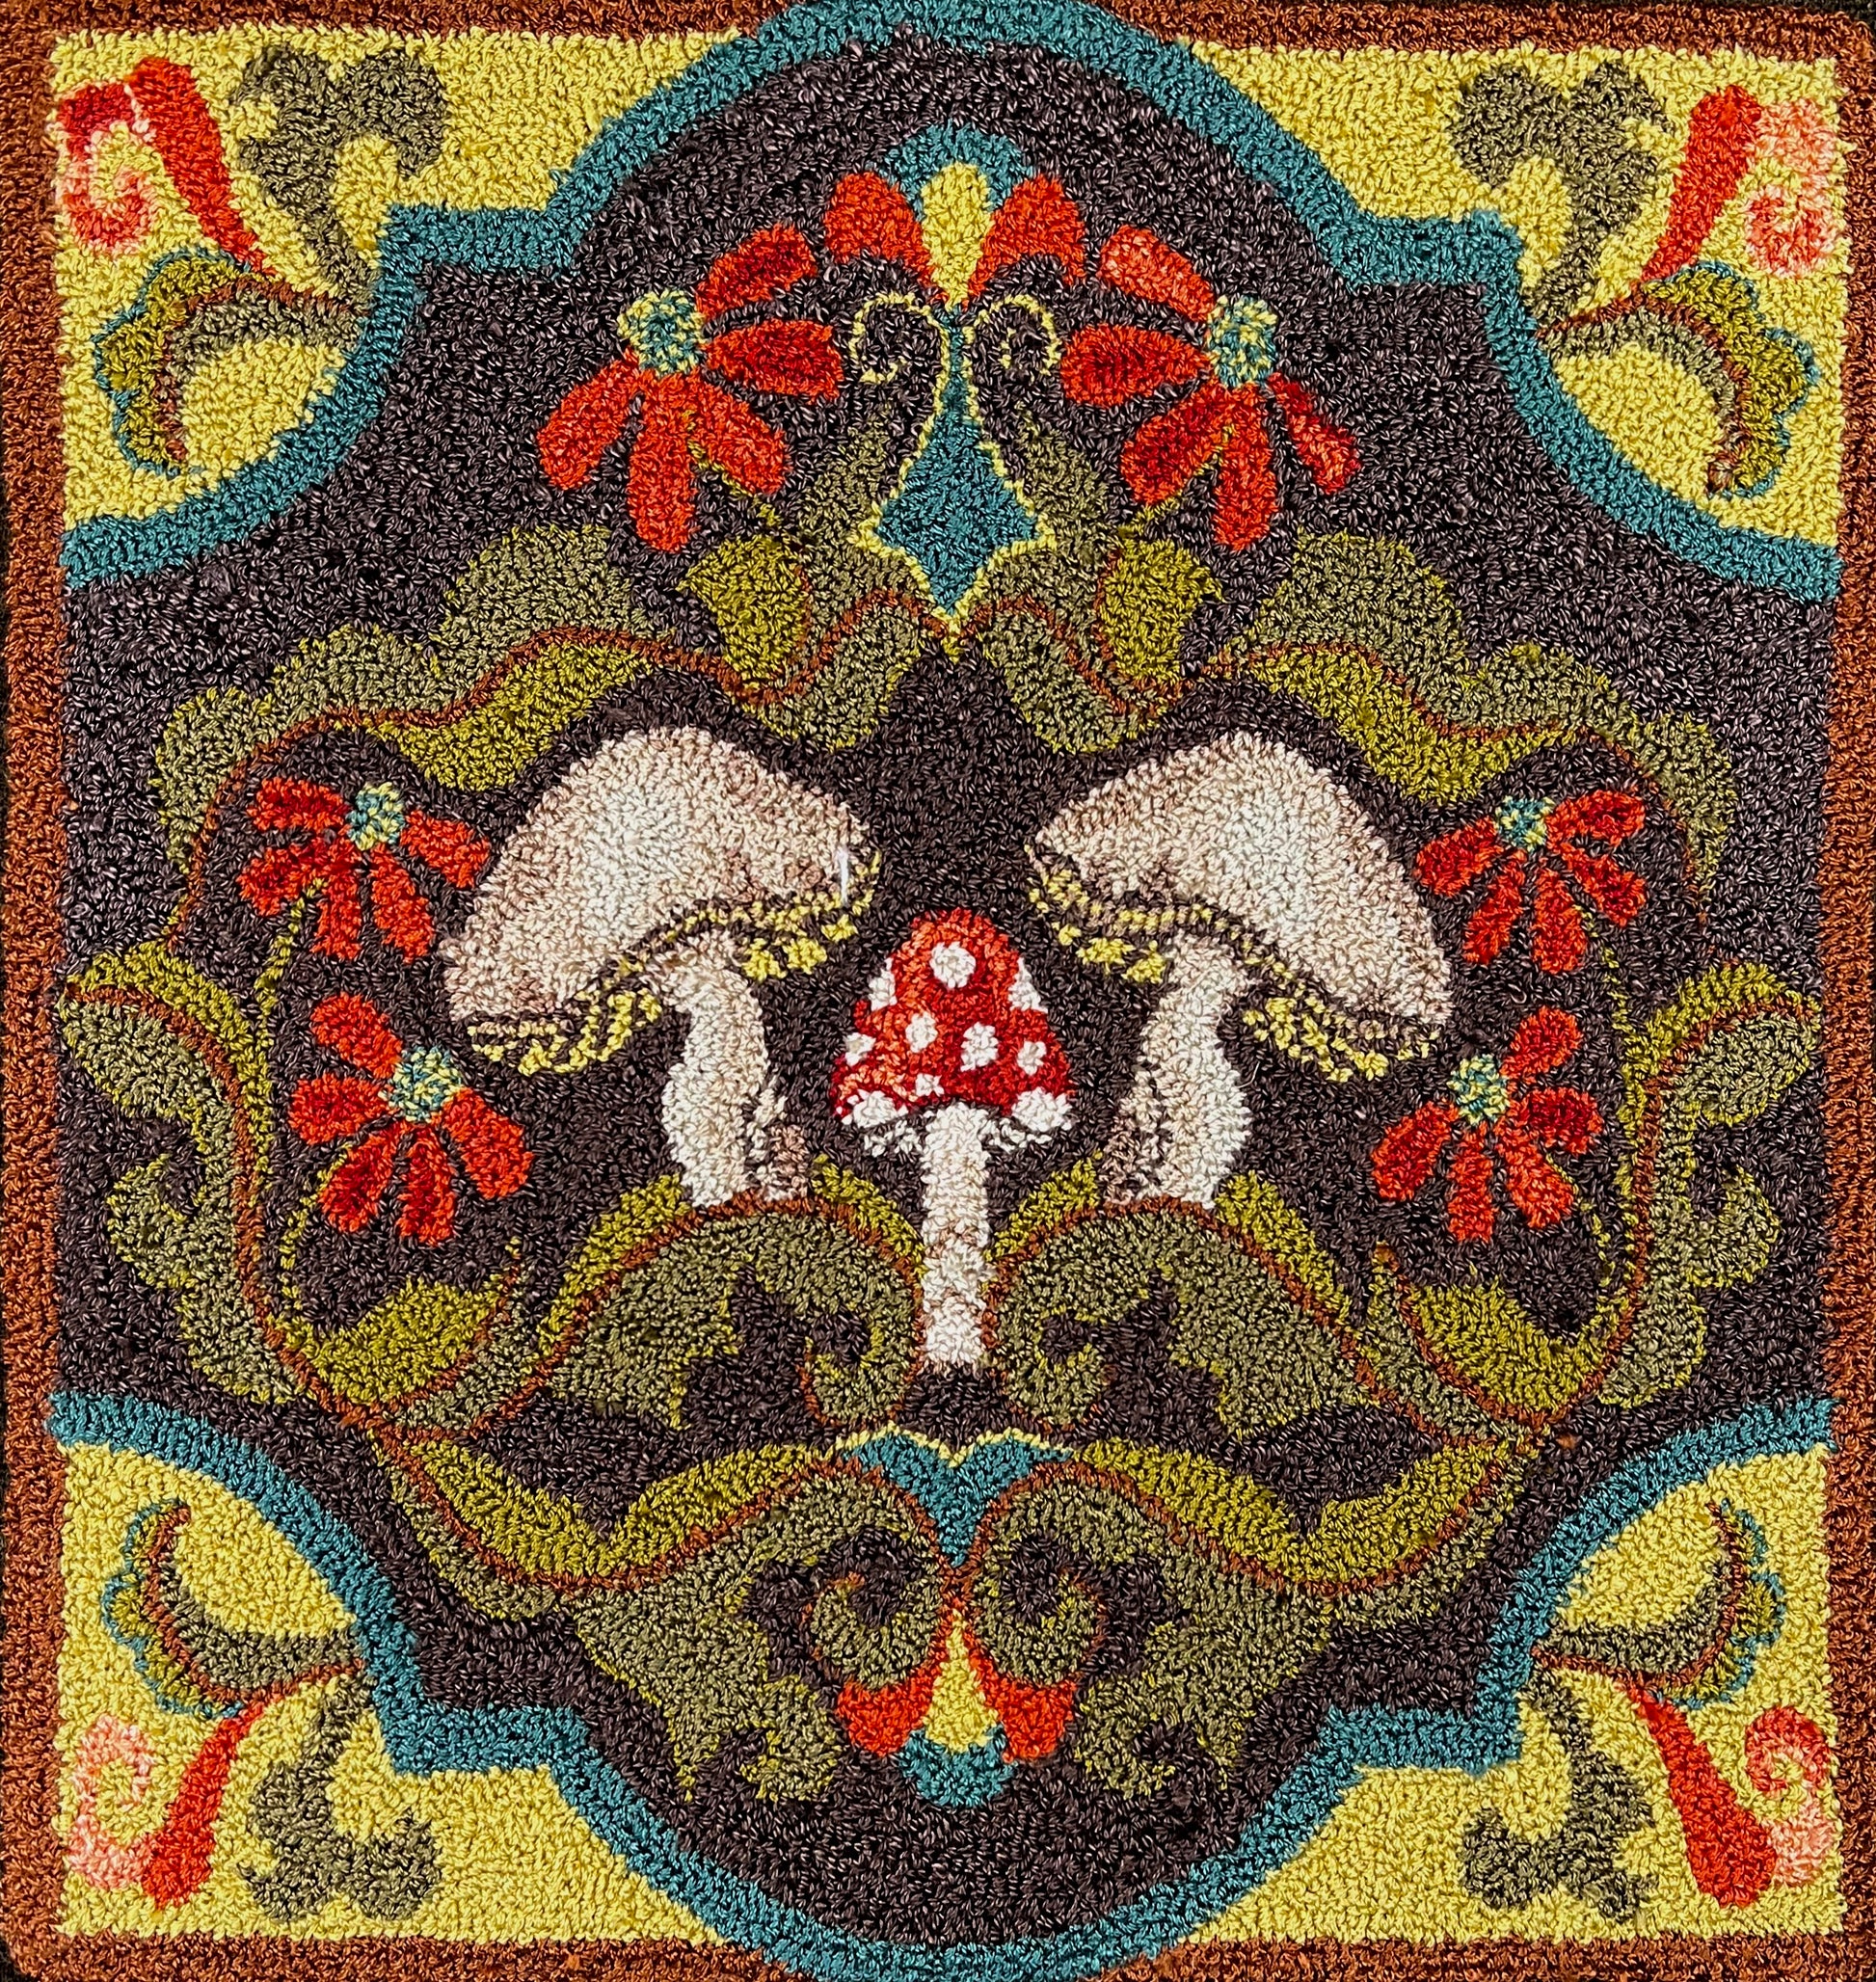 The Fungi Forest Linen Rug Hooking or Rug Punch Needle Pattern from Orphaned Wool. This woodsy mushroom pattern is perfect for any nature lover. Hand-drawn on natural Linen and available in two size, small and large. Copyright 2023 Kelly Kanyok-Orphaned Wool